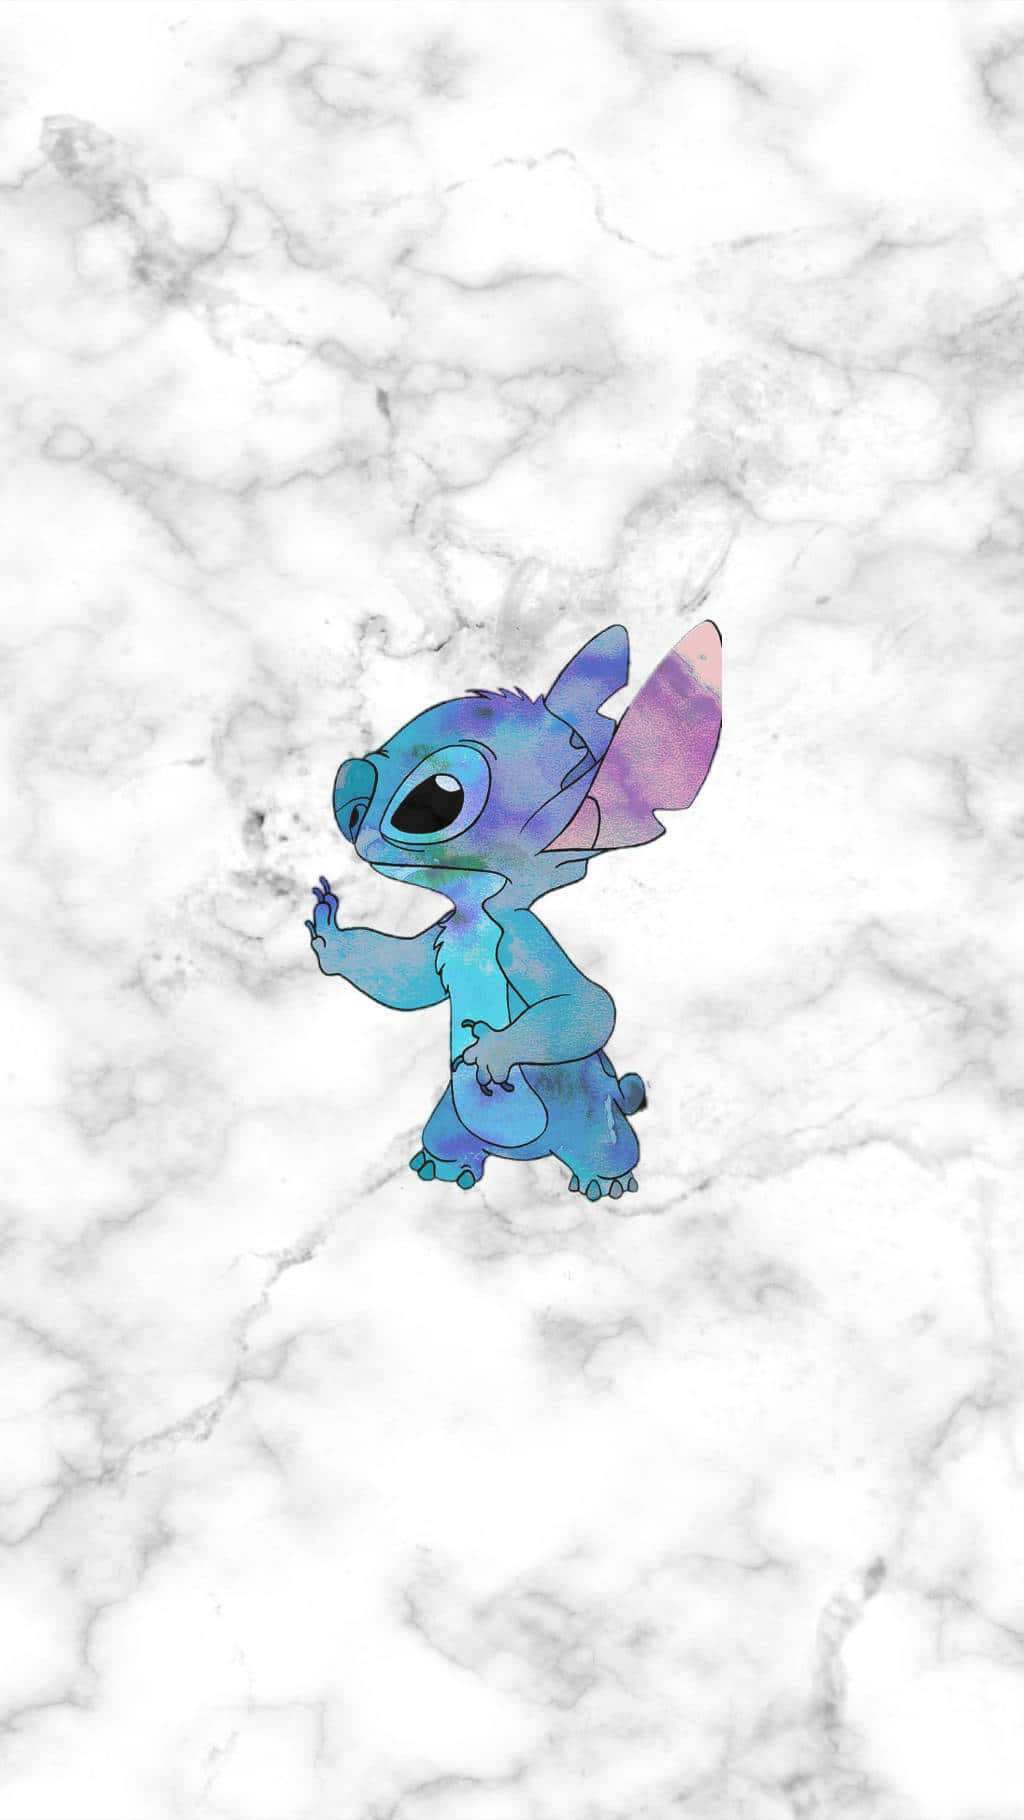 "Explore the world with Stitch!"